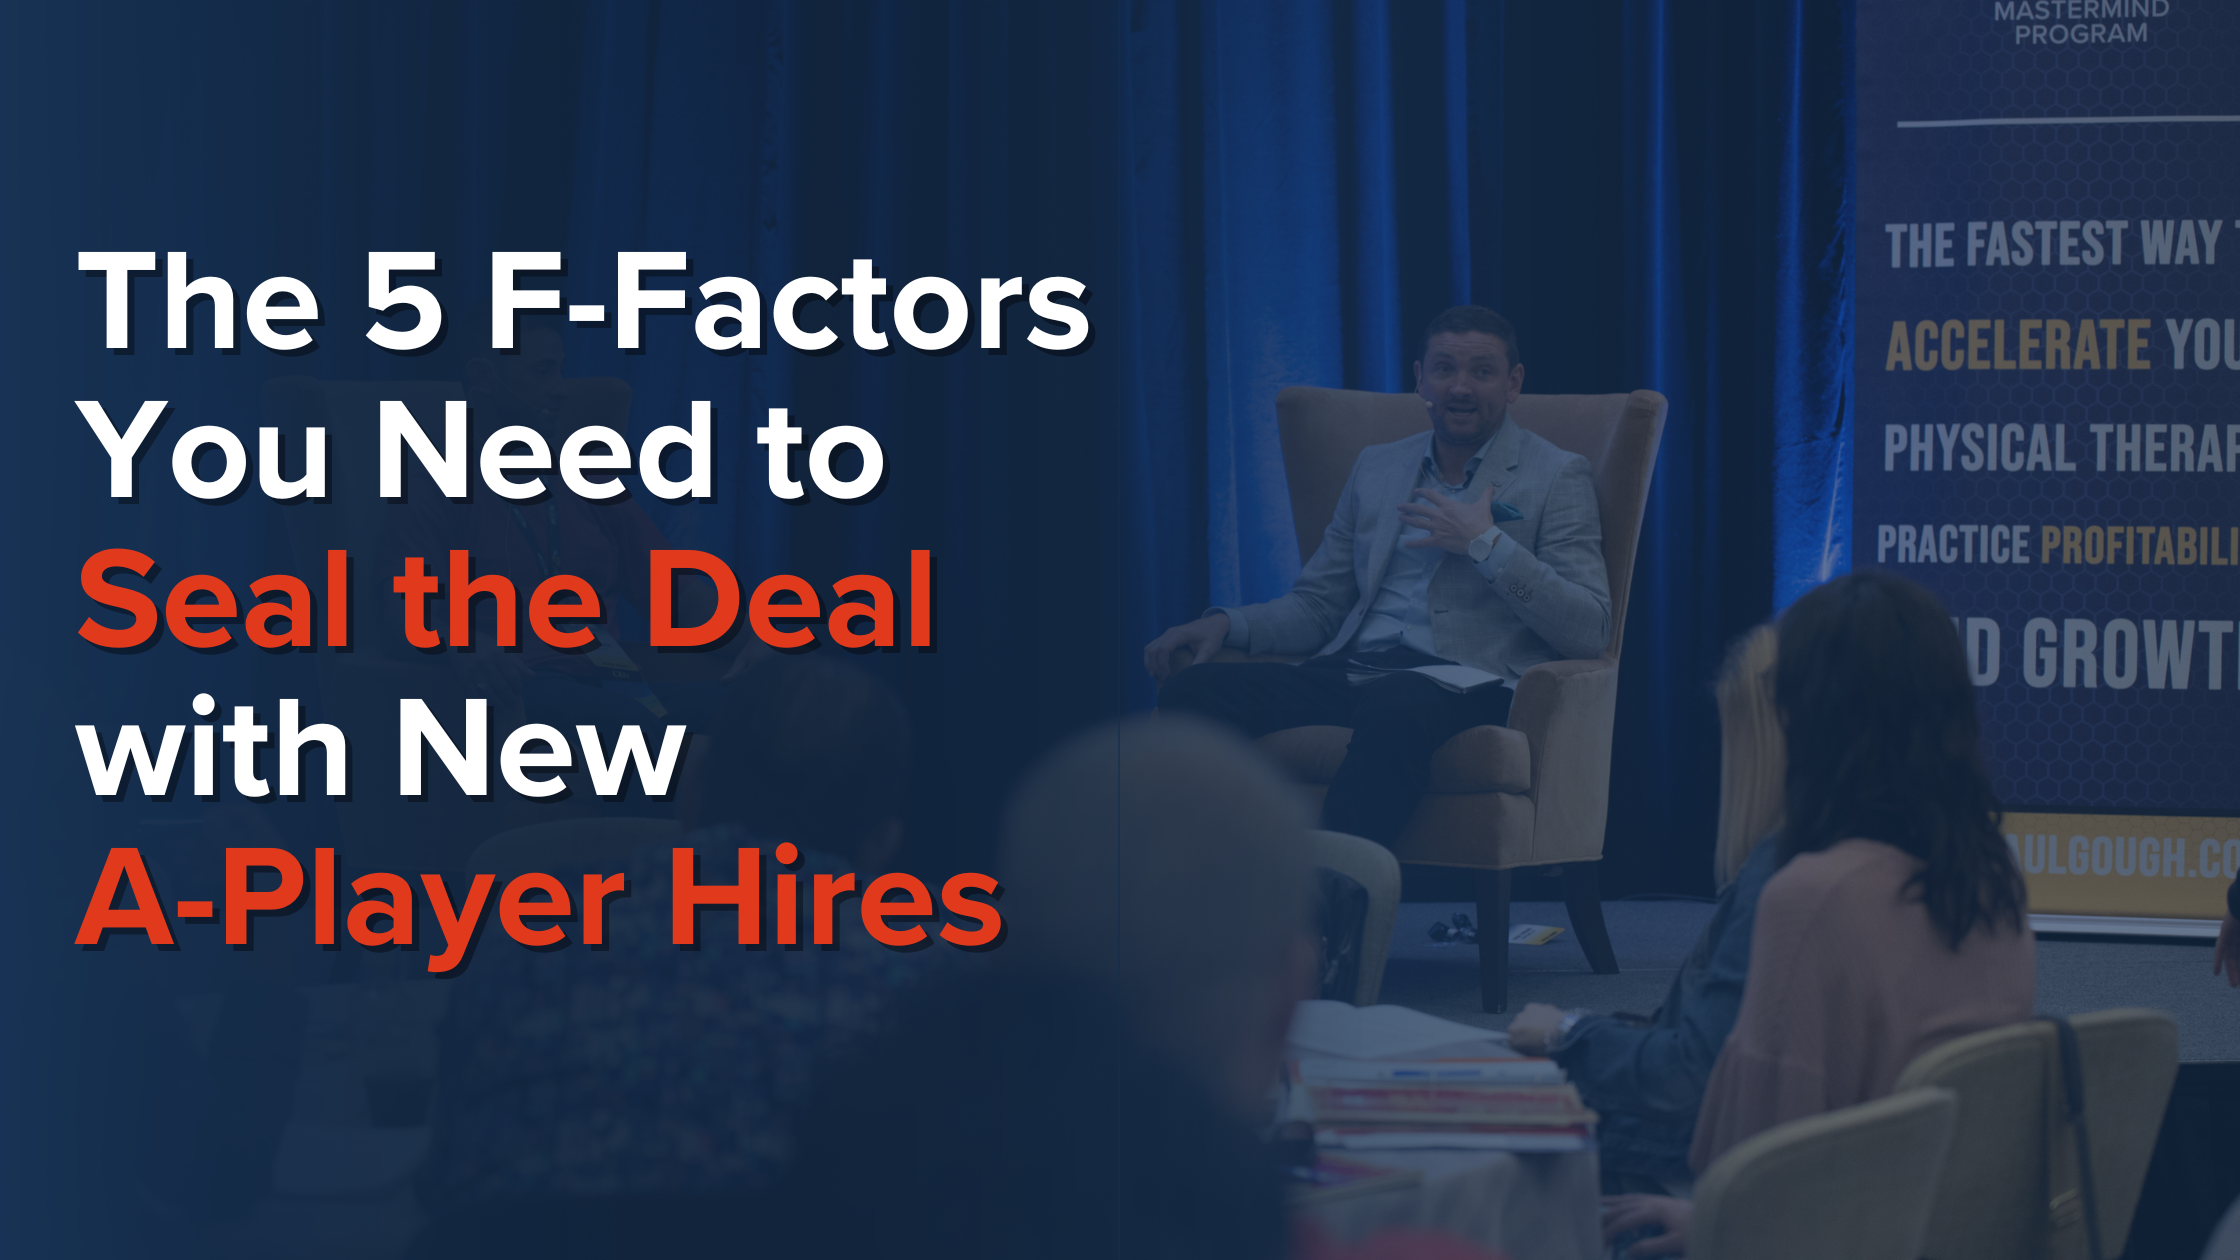 The 5 F-Factors You Need to Seal the Deal with New A-Player Hires